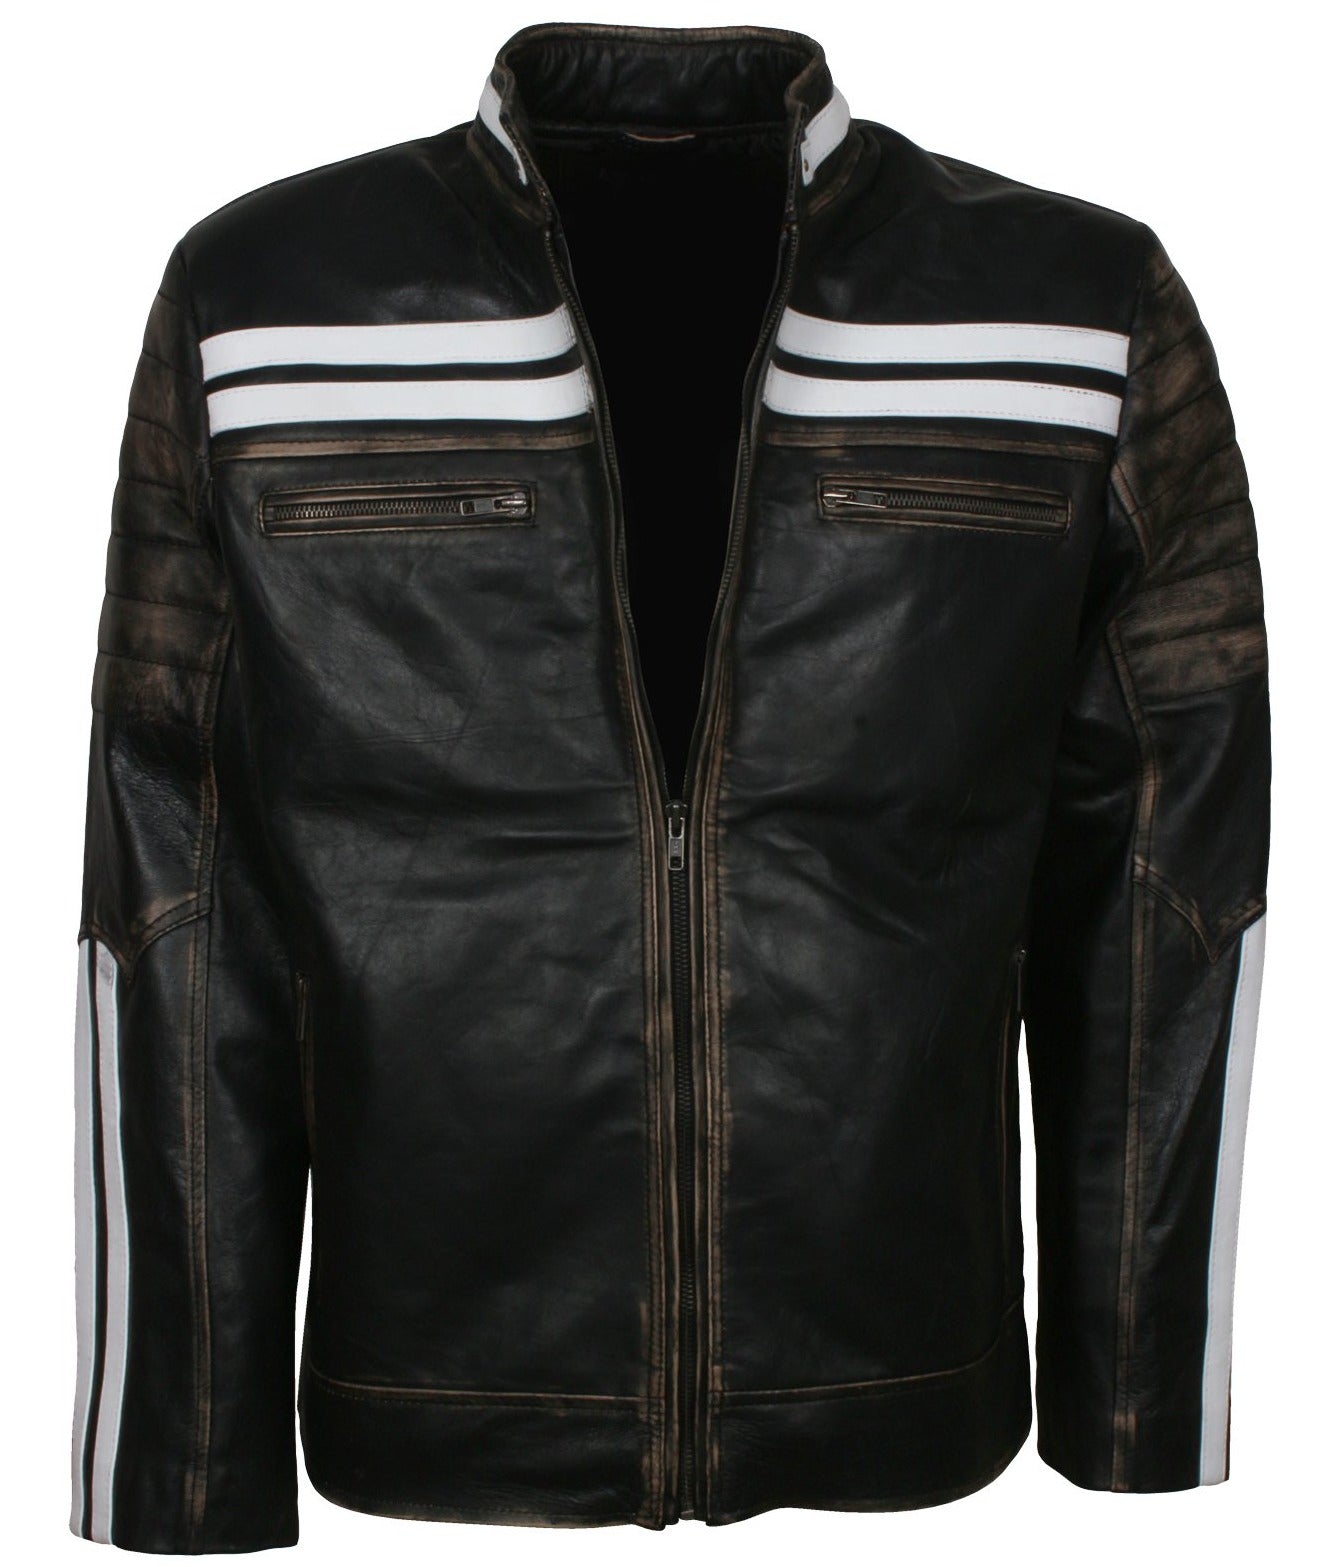 Black and White Striped Jacket Mens